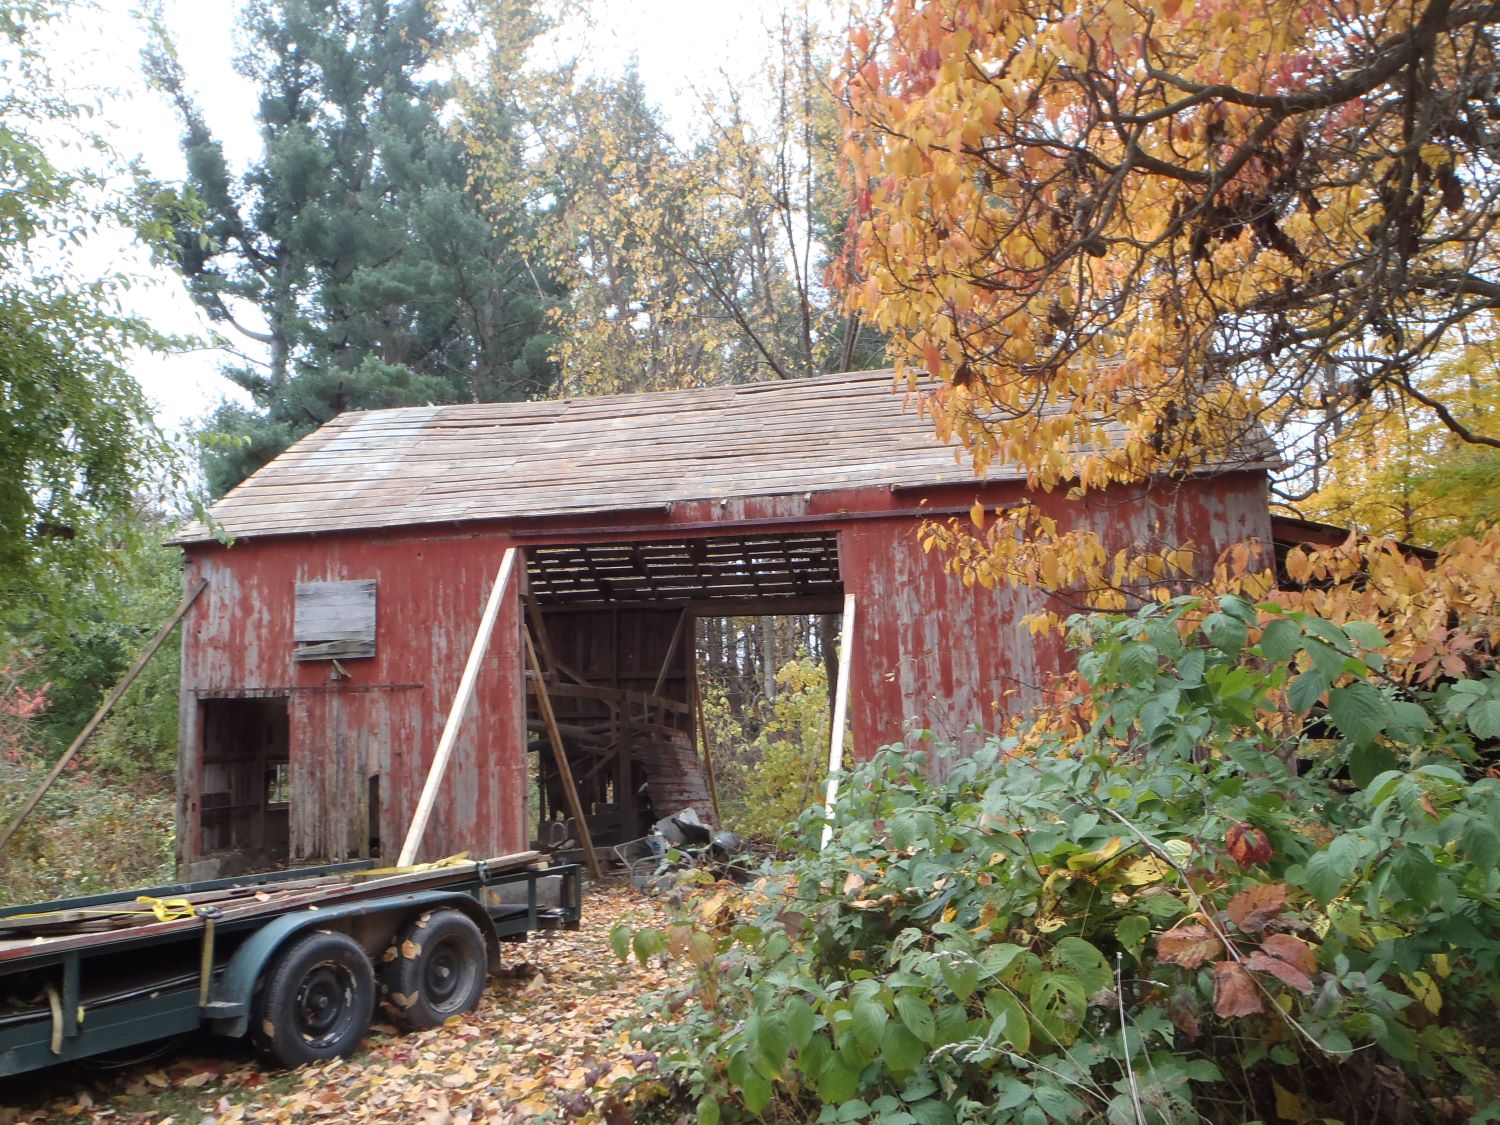 Setting up to begin deconstructing a 125 year old barn